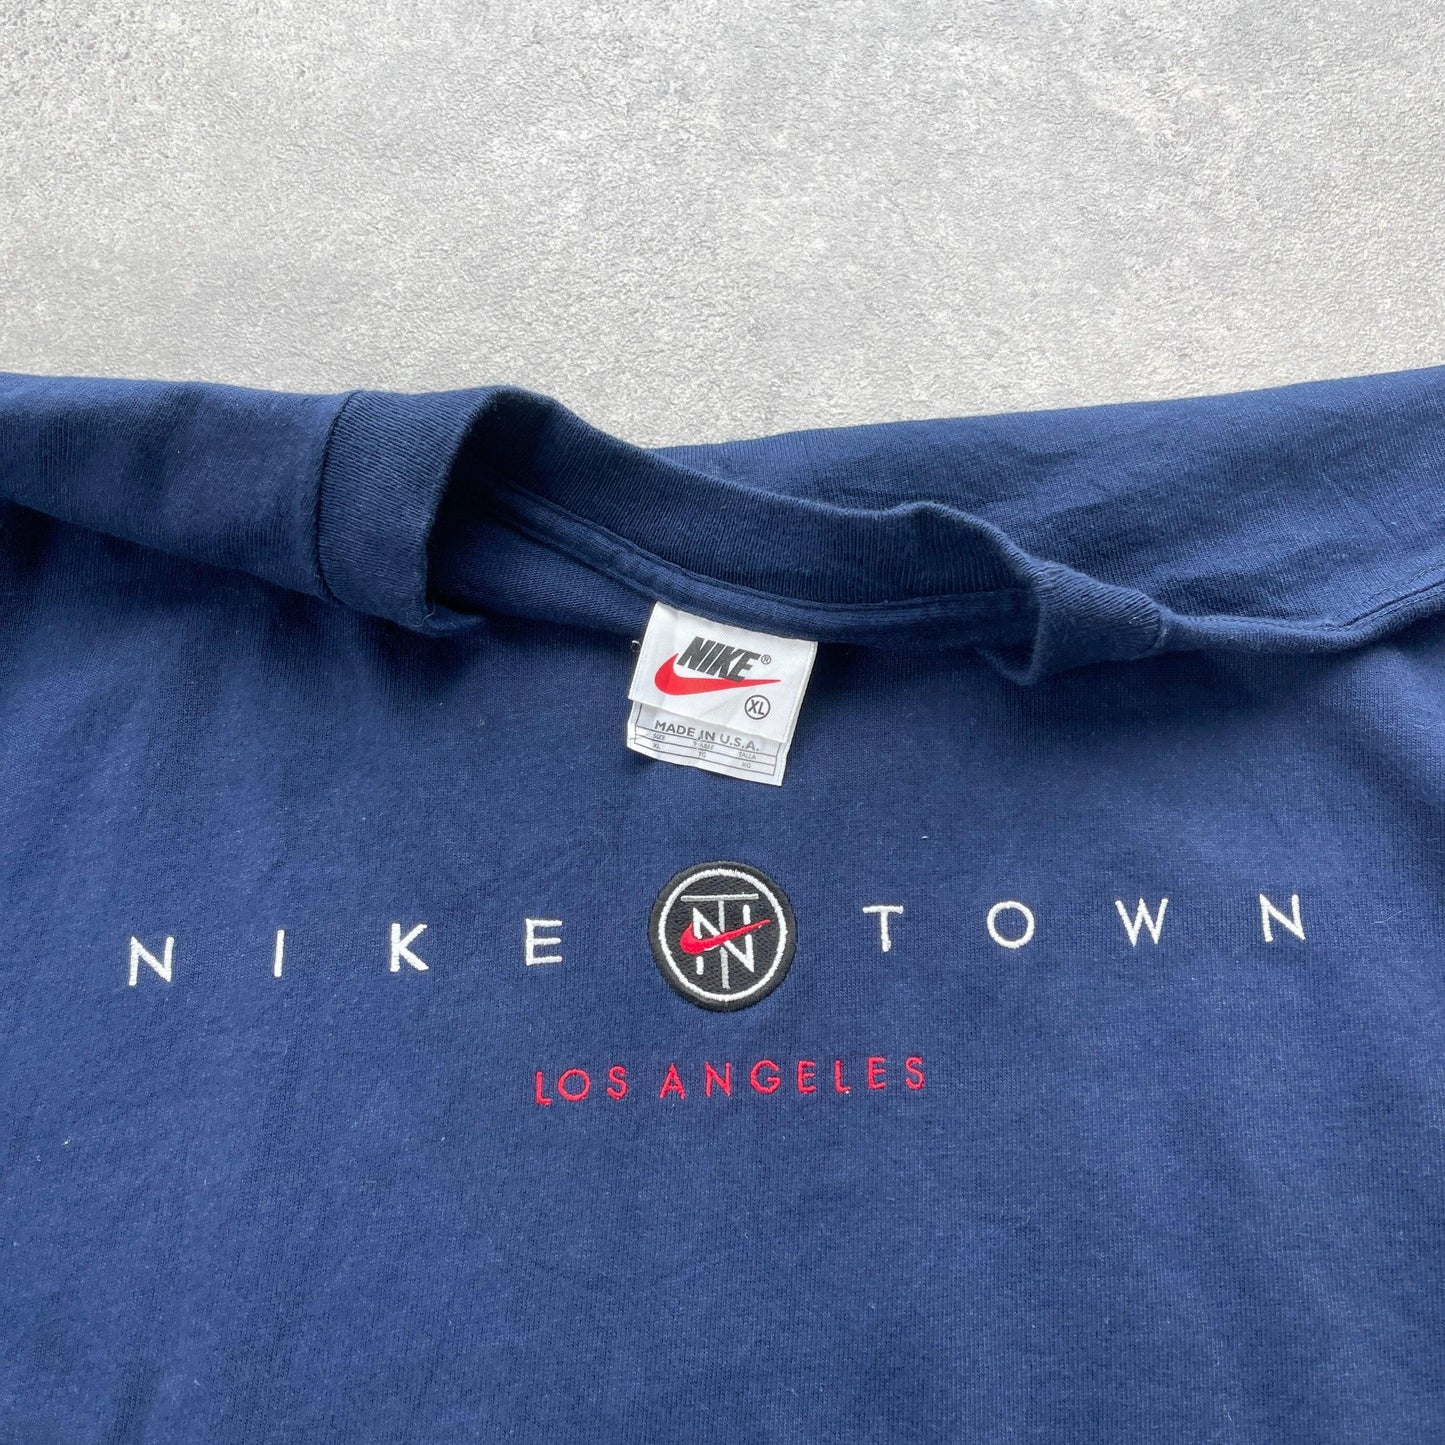 Nike Town Los Angels RARE 1990s heavyweight embroidered t-shirt (XL) - Known Source